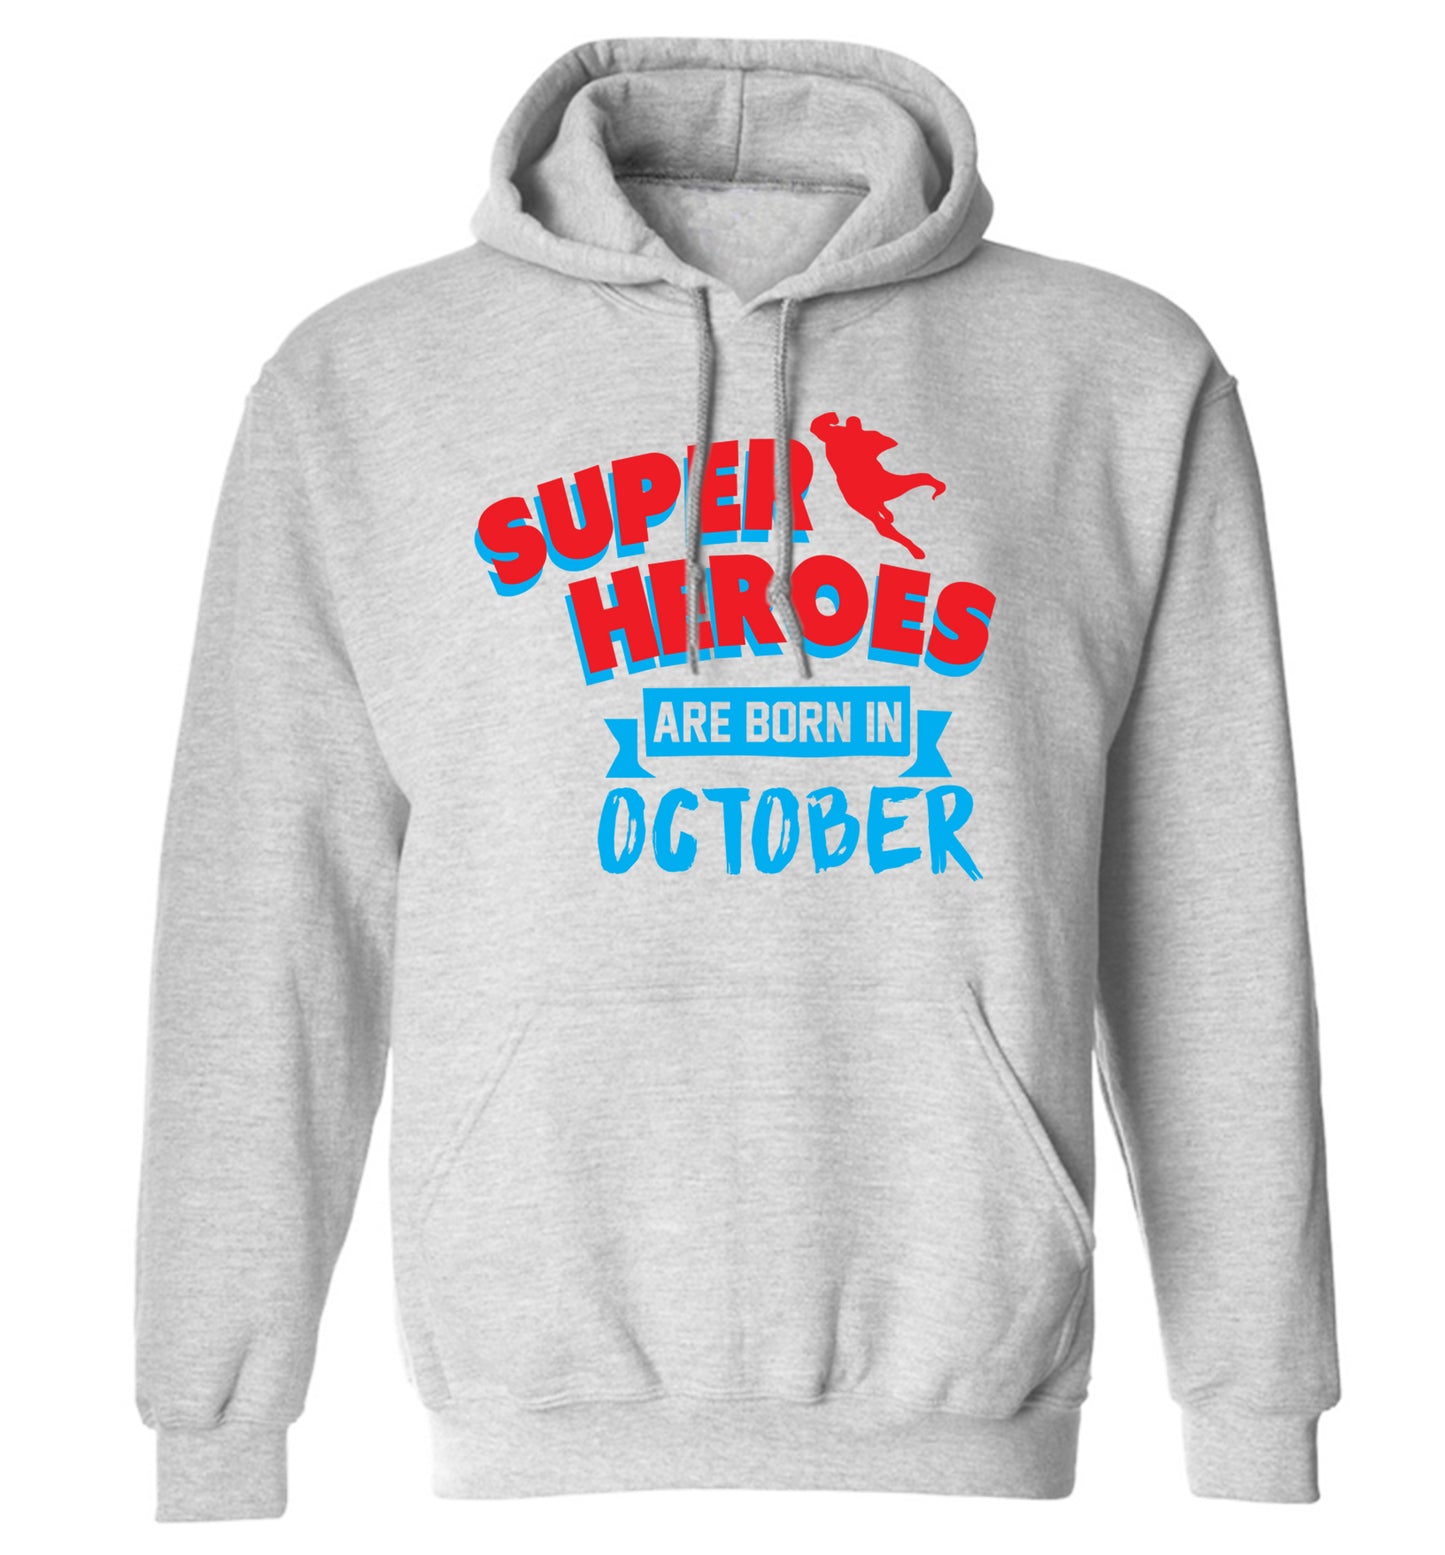 Superheroes are born in October adults unisex grey hoodie 2XL